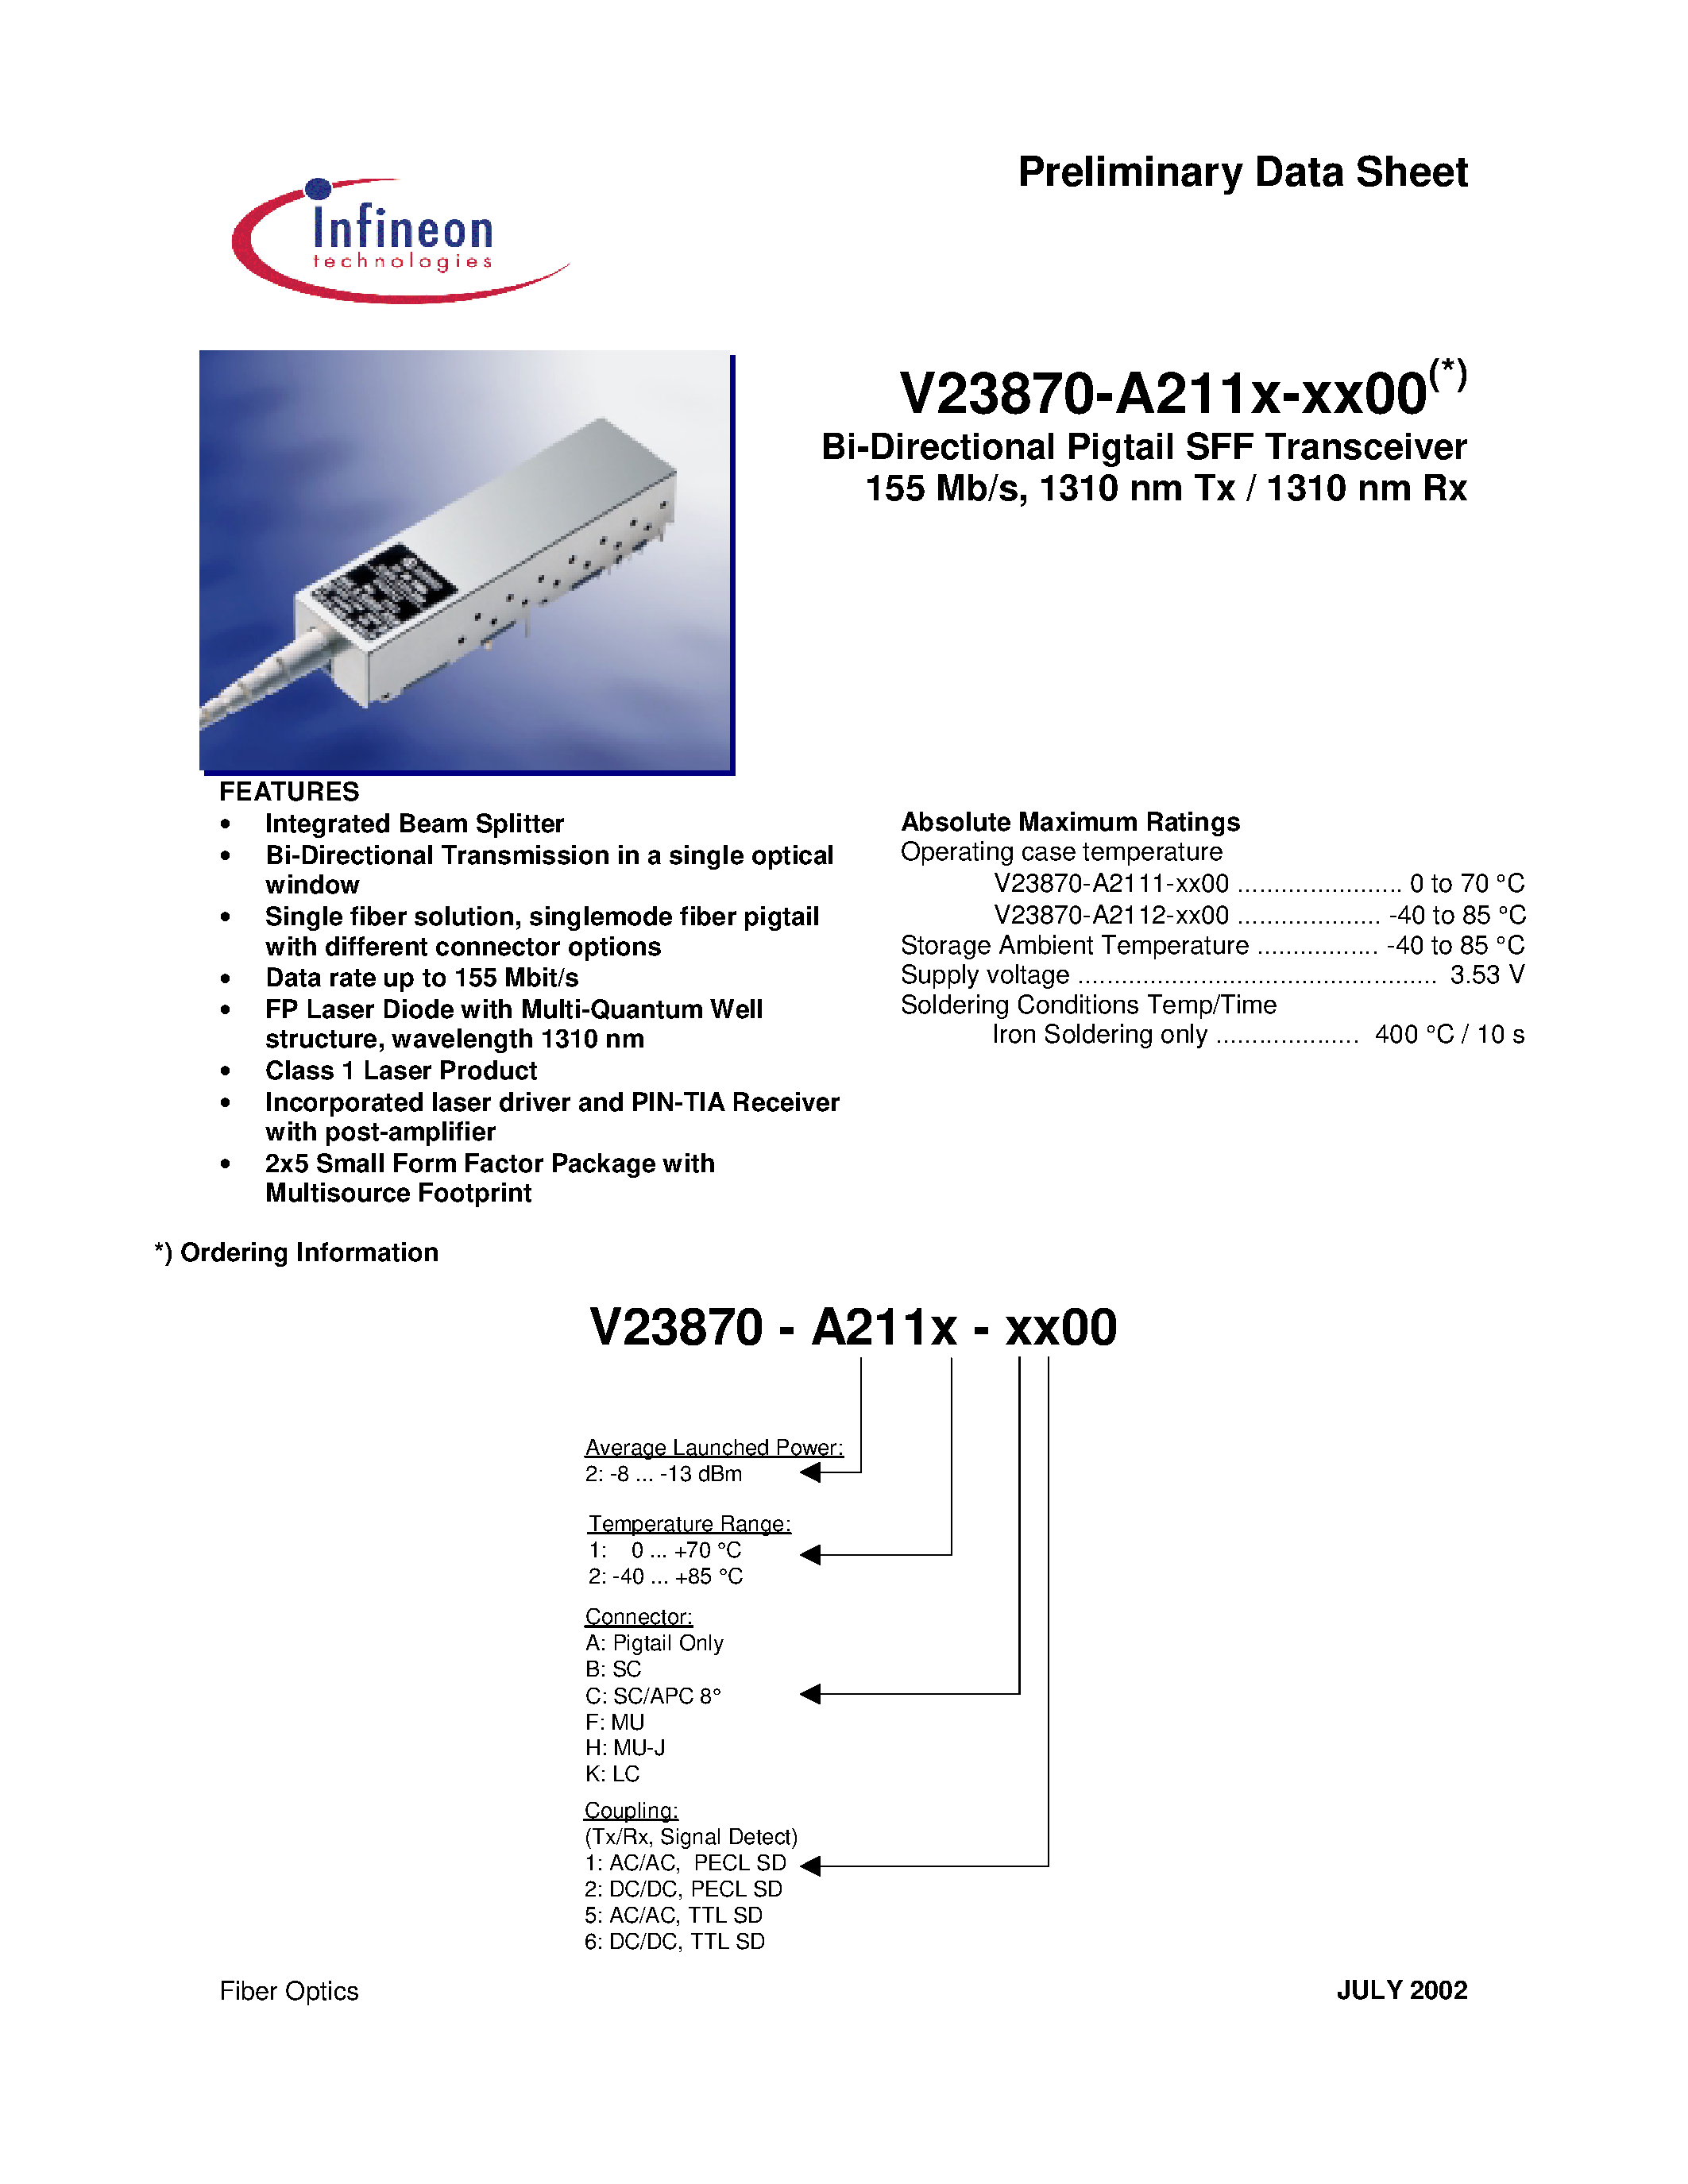 Datasheet V23870-A2111-A200 - Bi-Directional Pigtail SFF Transceiver 155 Mb/s/ 1310 nm Tx / 1310 nm Rx page 1